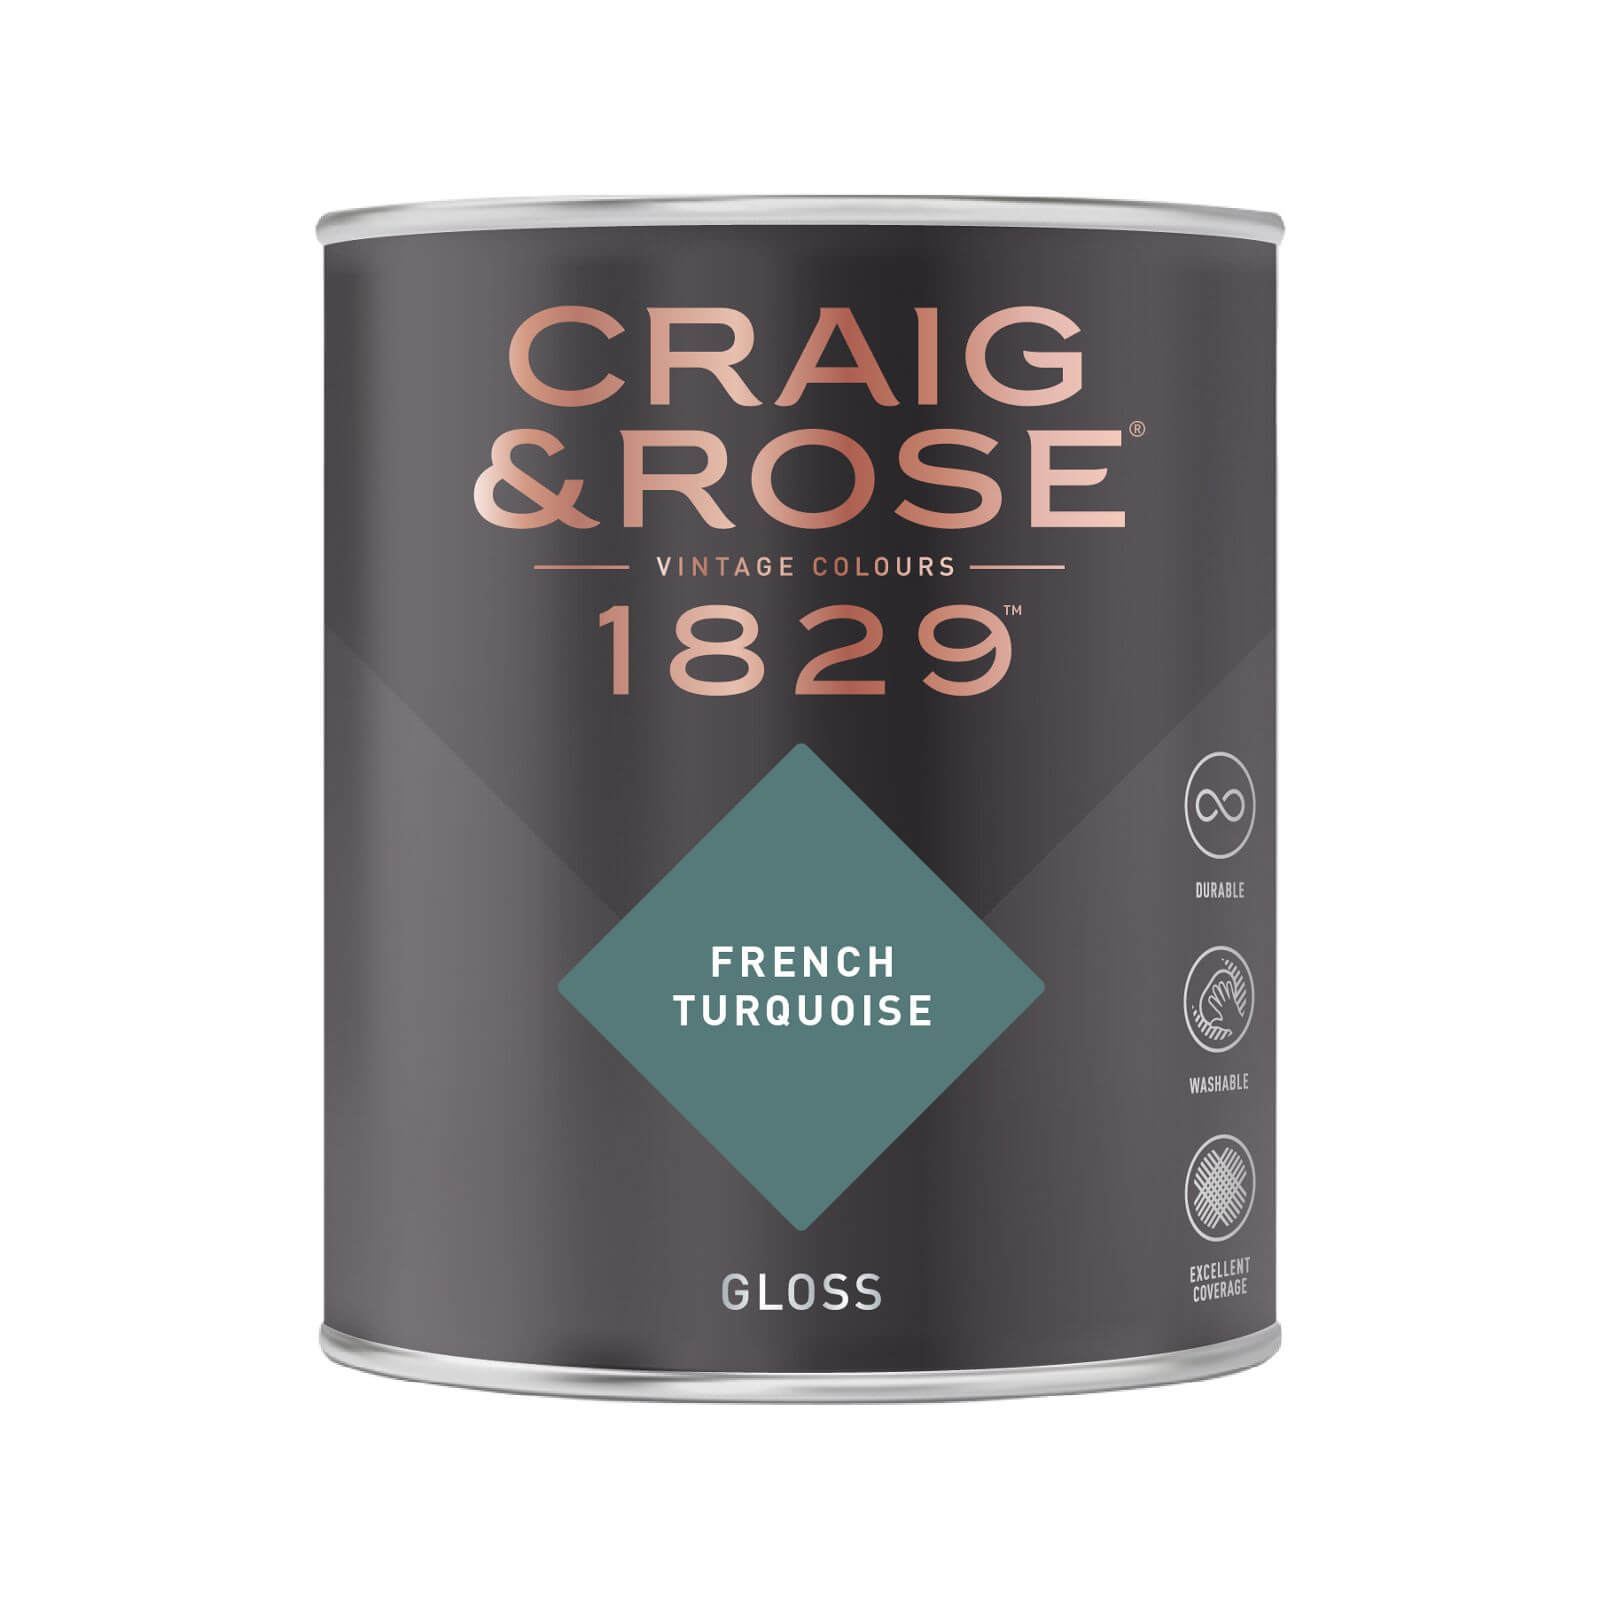 Craig & Rose 1829 Gloss Paint French Turquoise - 750ml